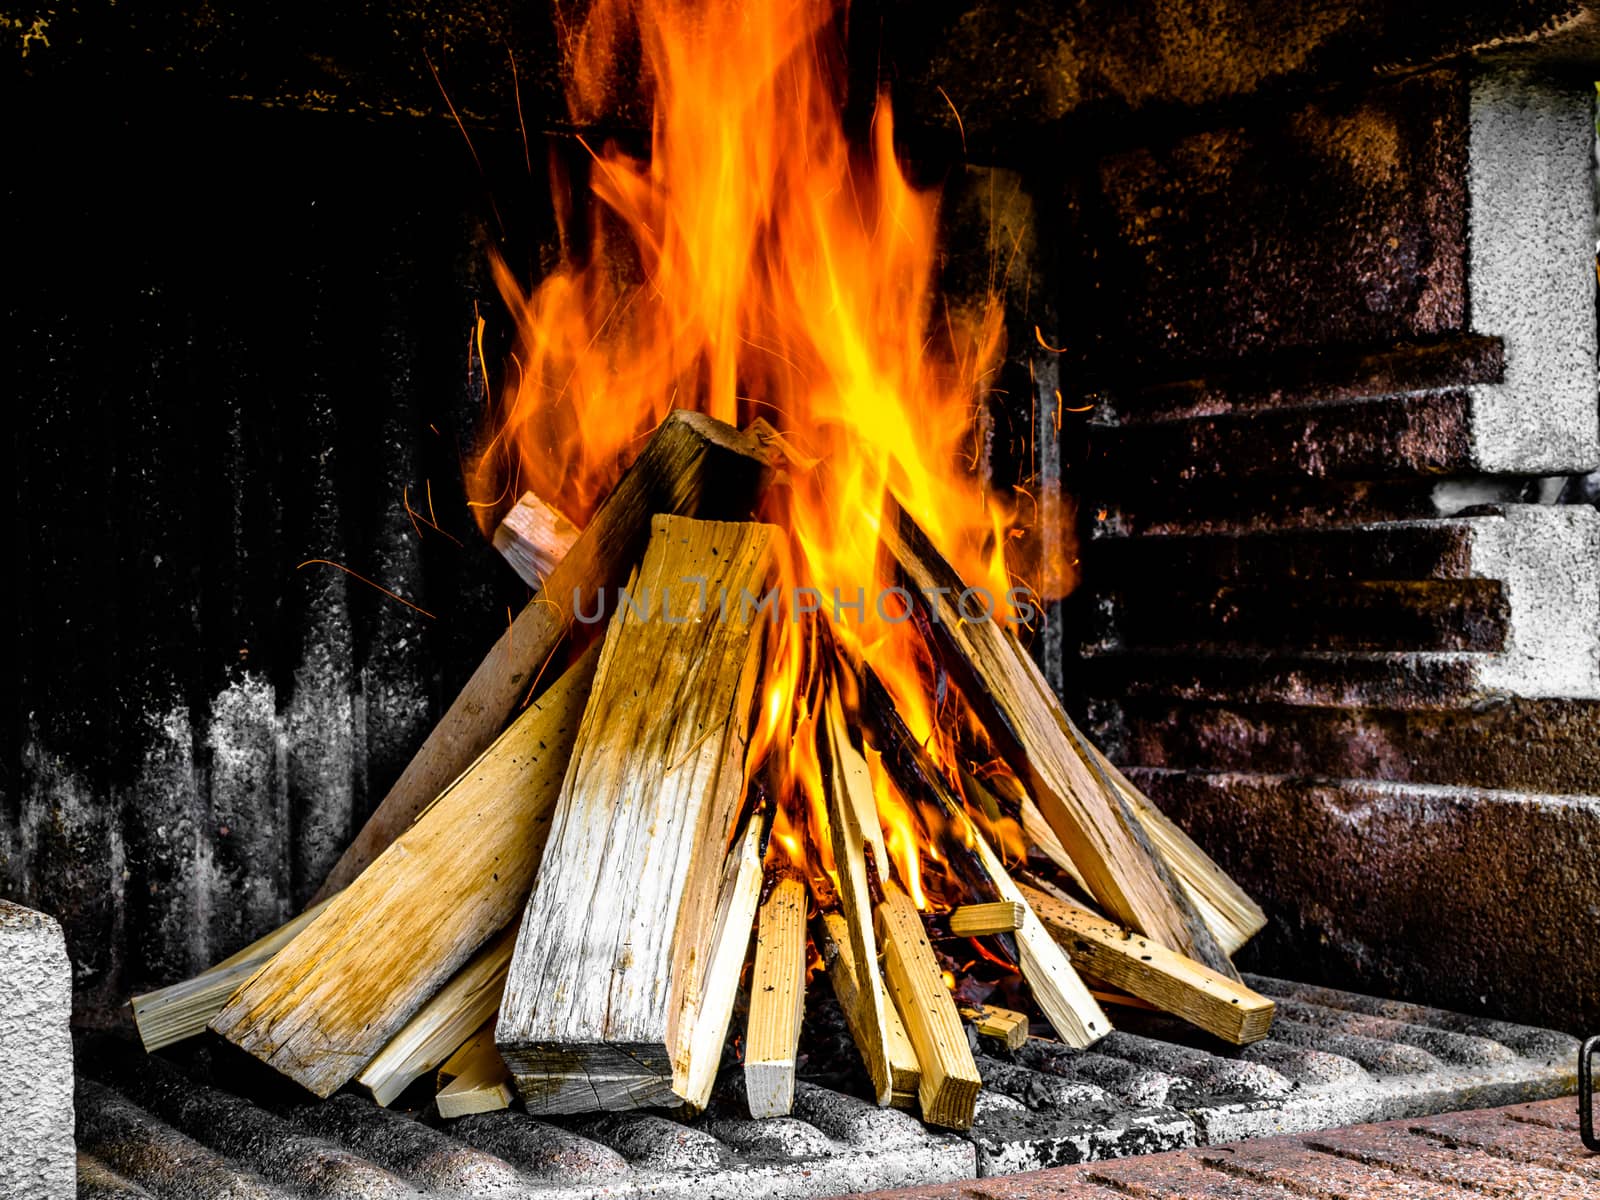 Preparation of a BBQ - wood piled up - fire reaching top of the pile